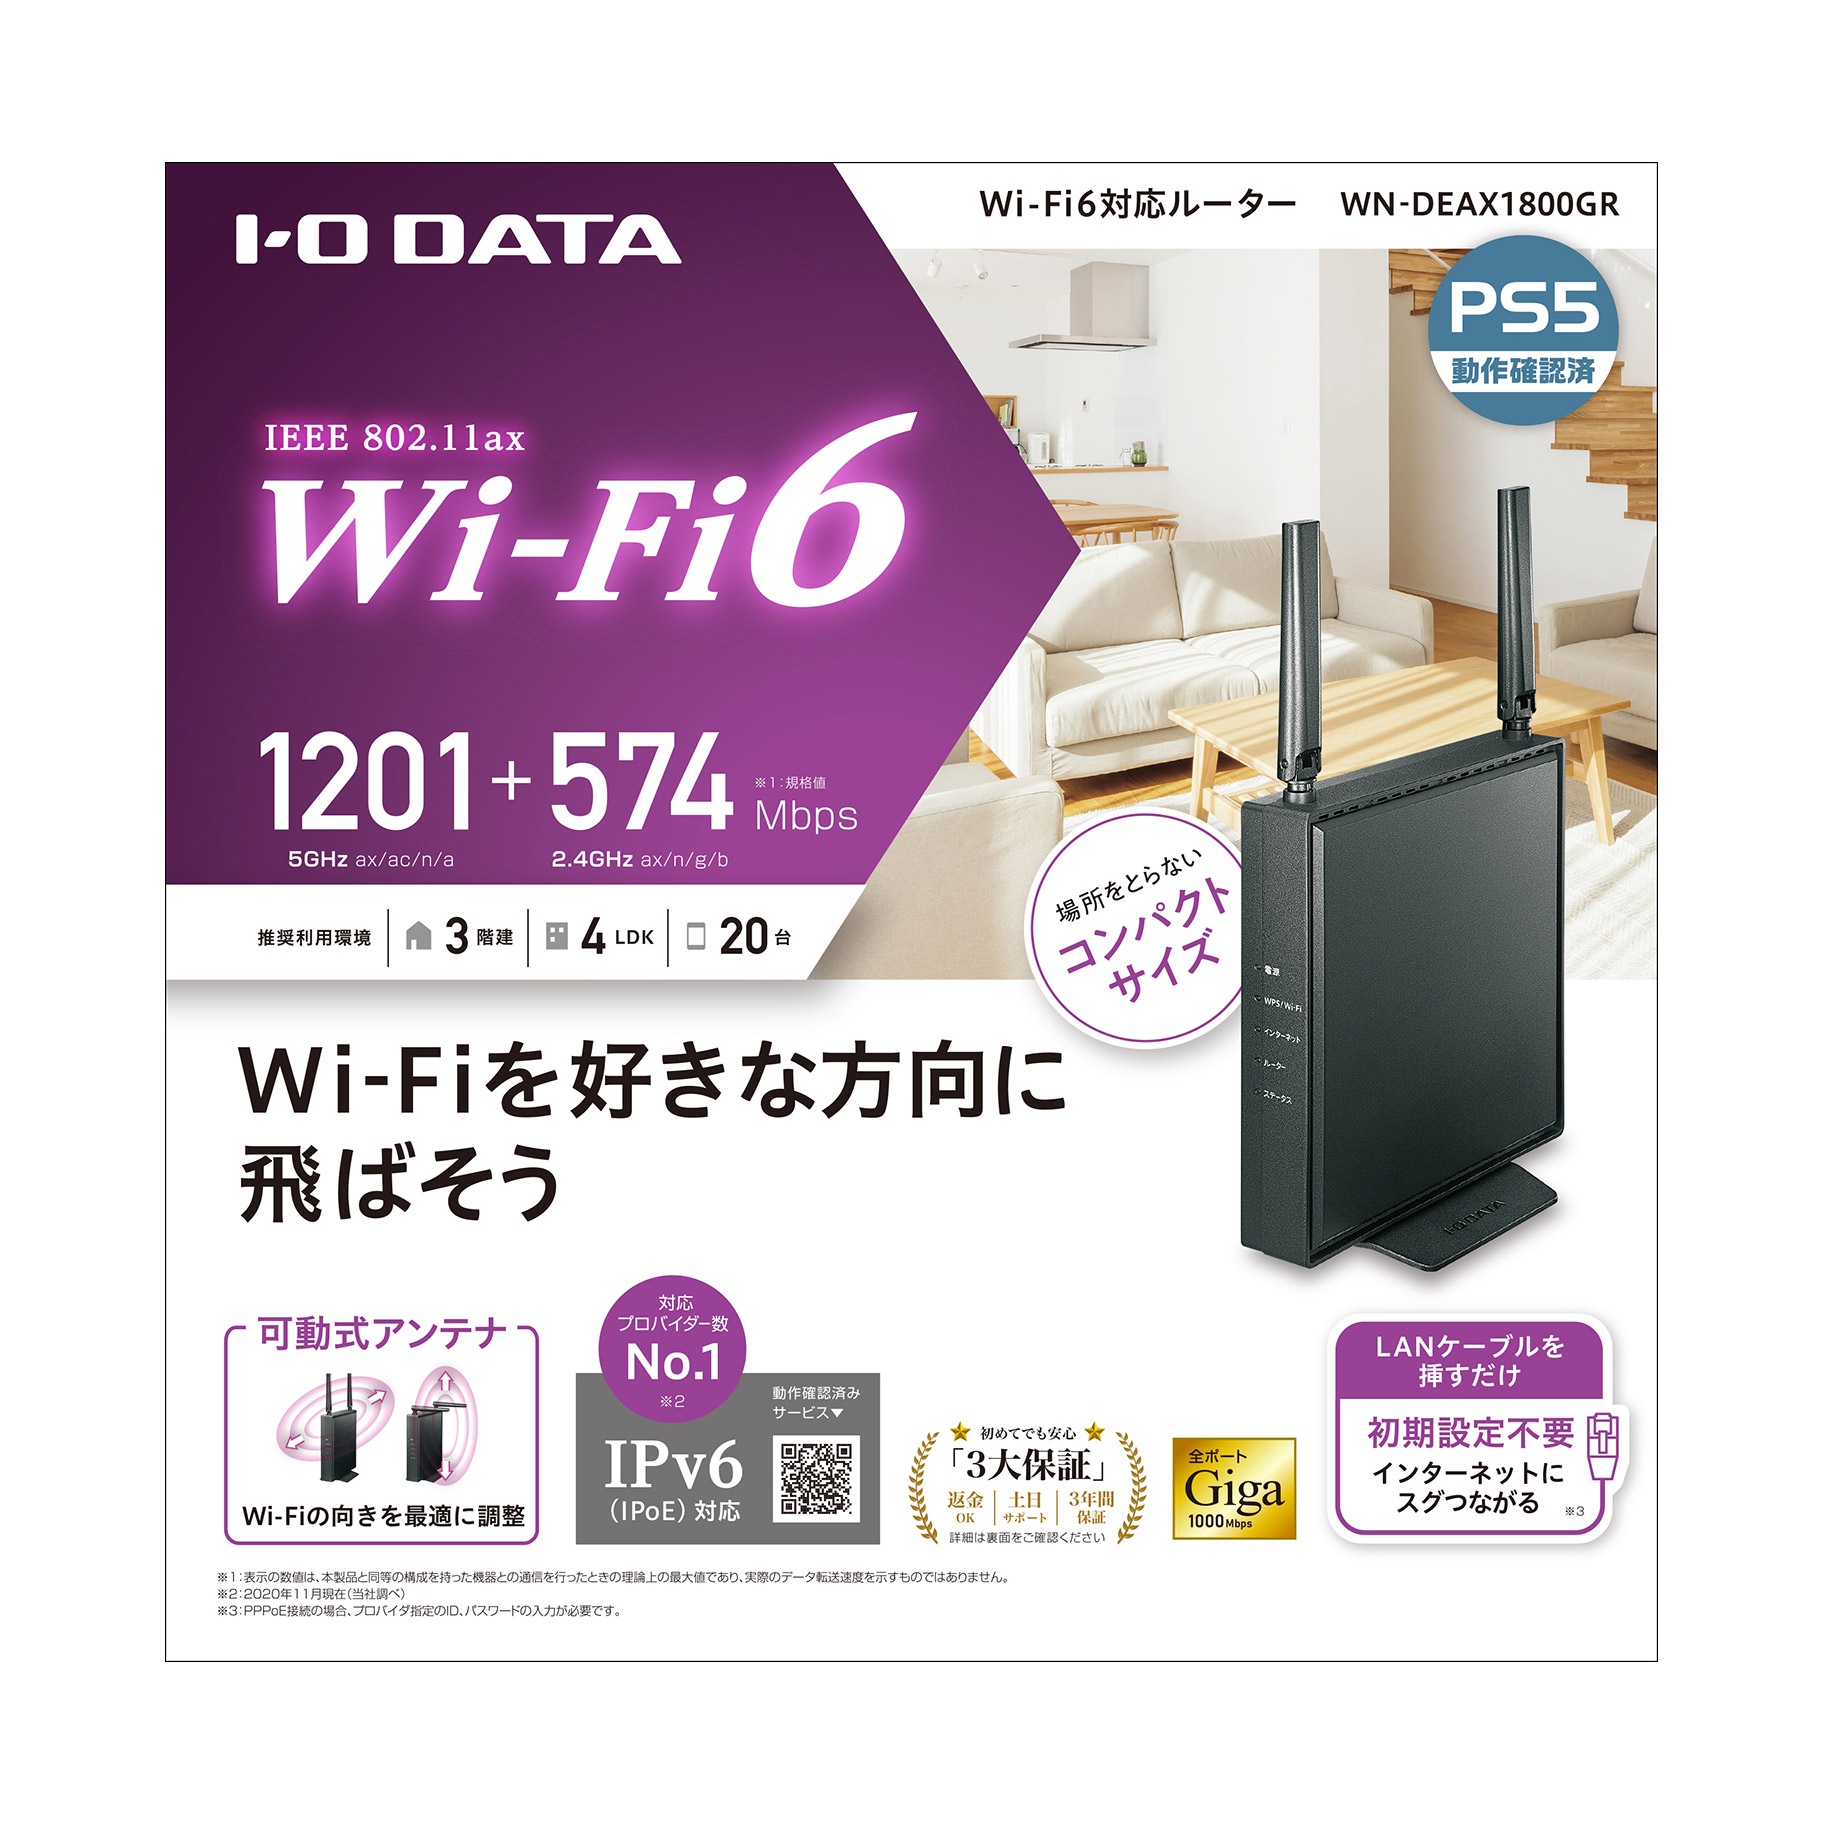 Wi-Fi 6ルーター 1201＋574Mbps[PS5動作確認済み] WN-DEAX1800GR ［Wi